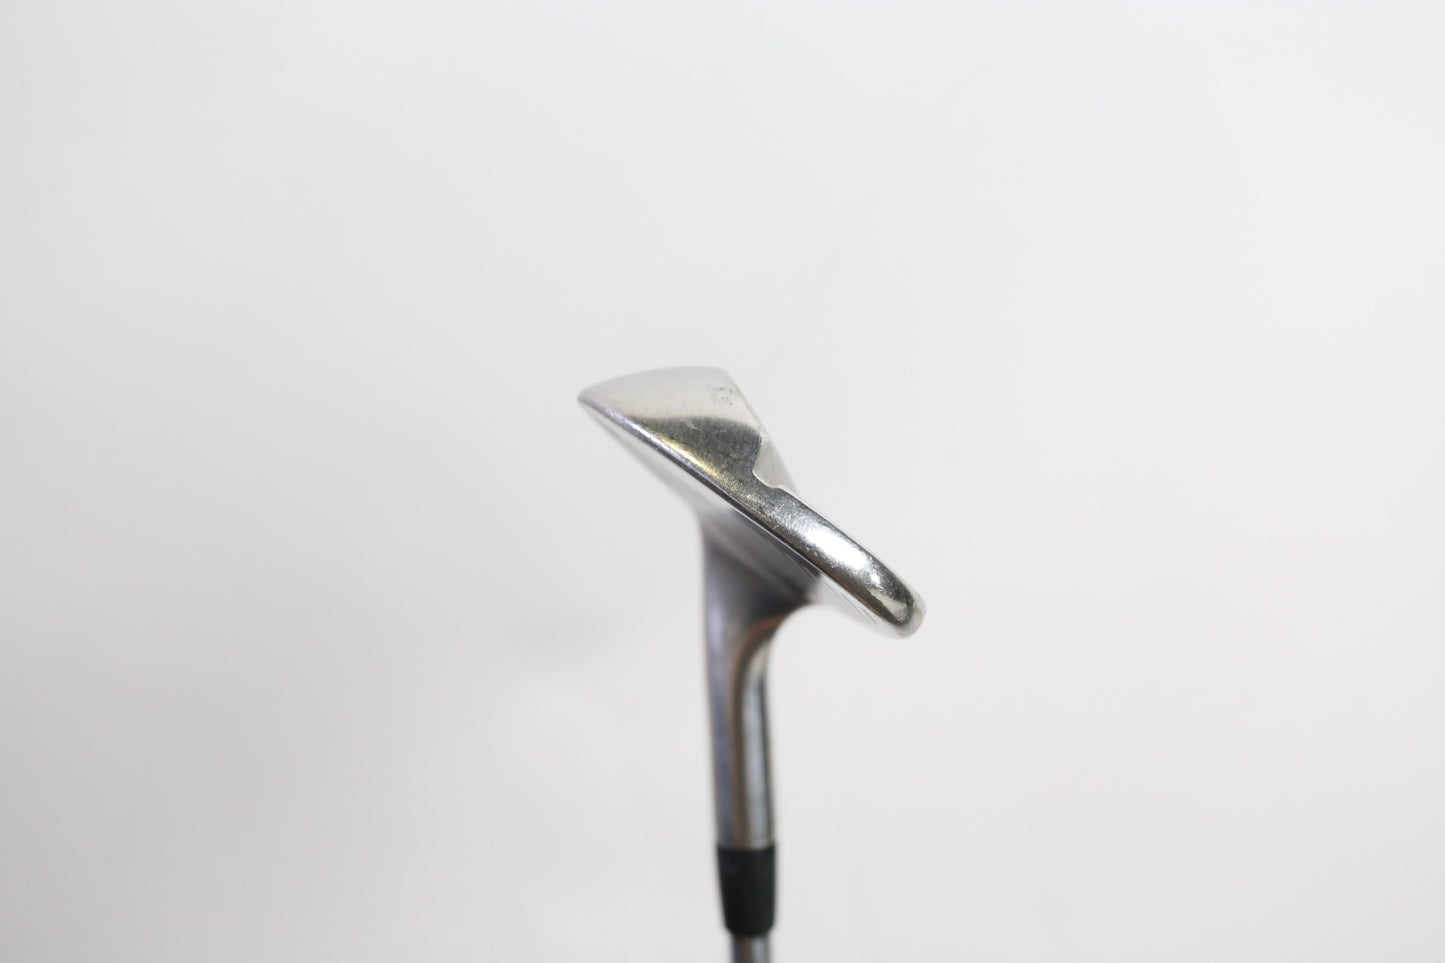 Used Ping Tour Gap Wedge - Right-Handed - 56 Degrees - Stiff Flex